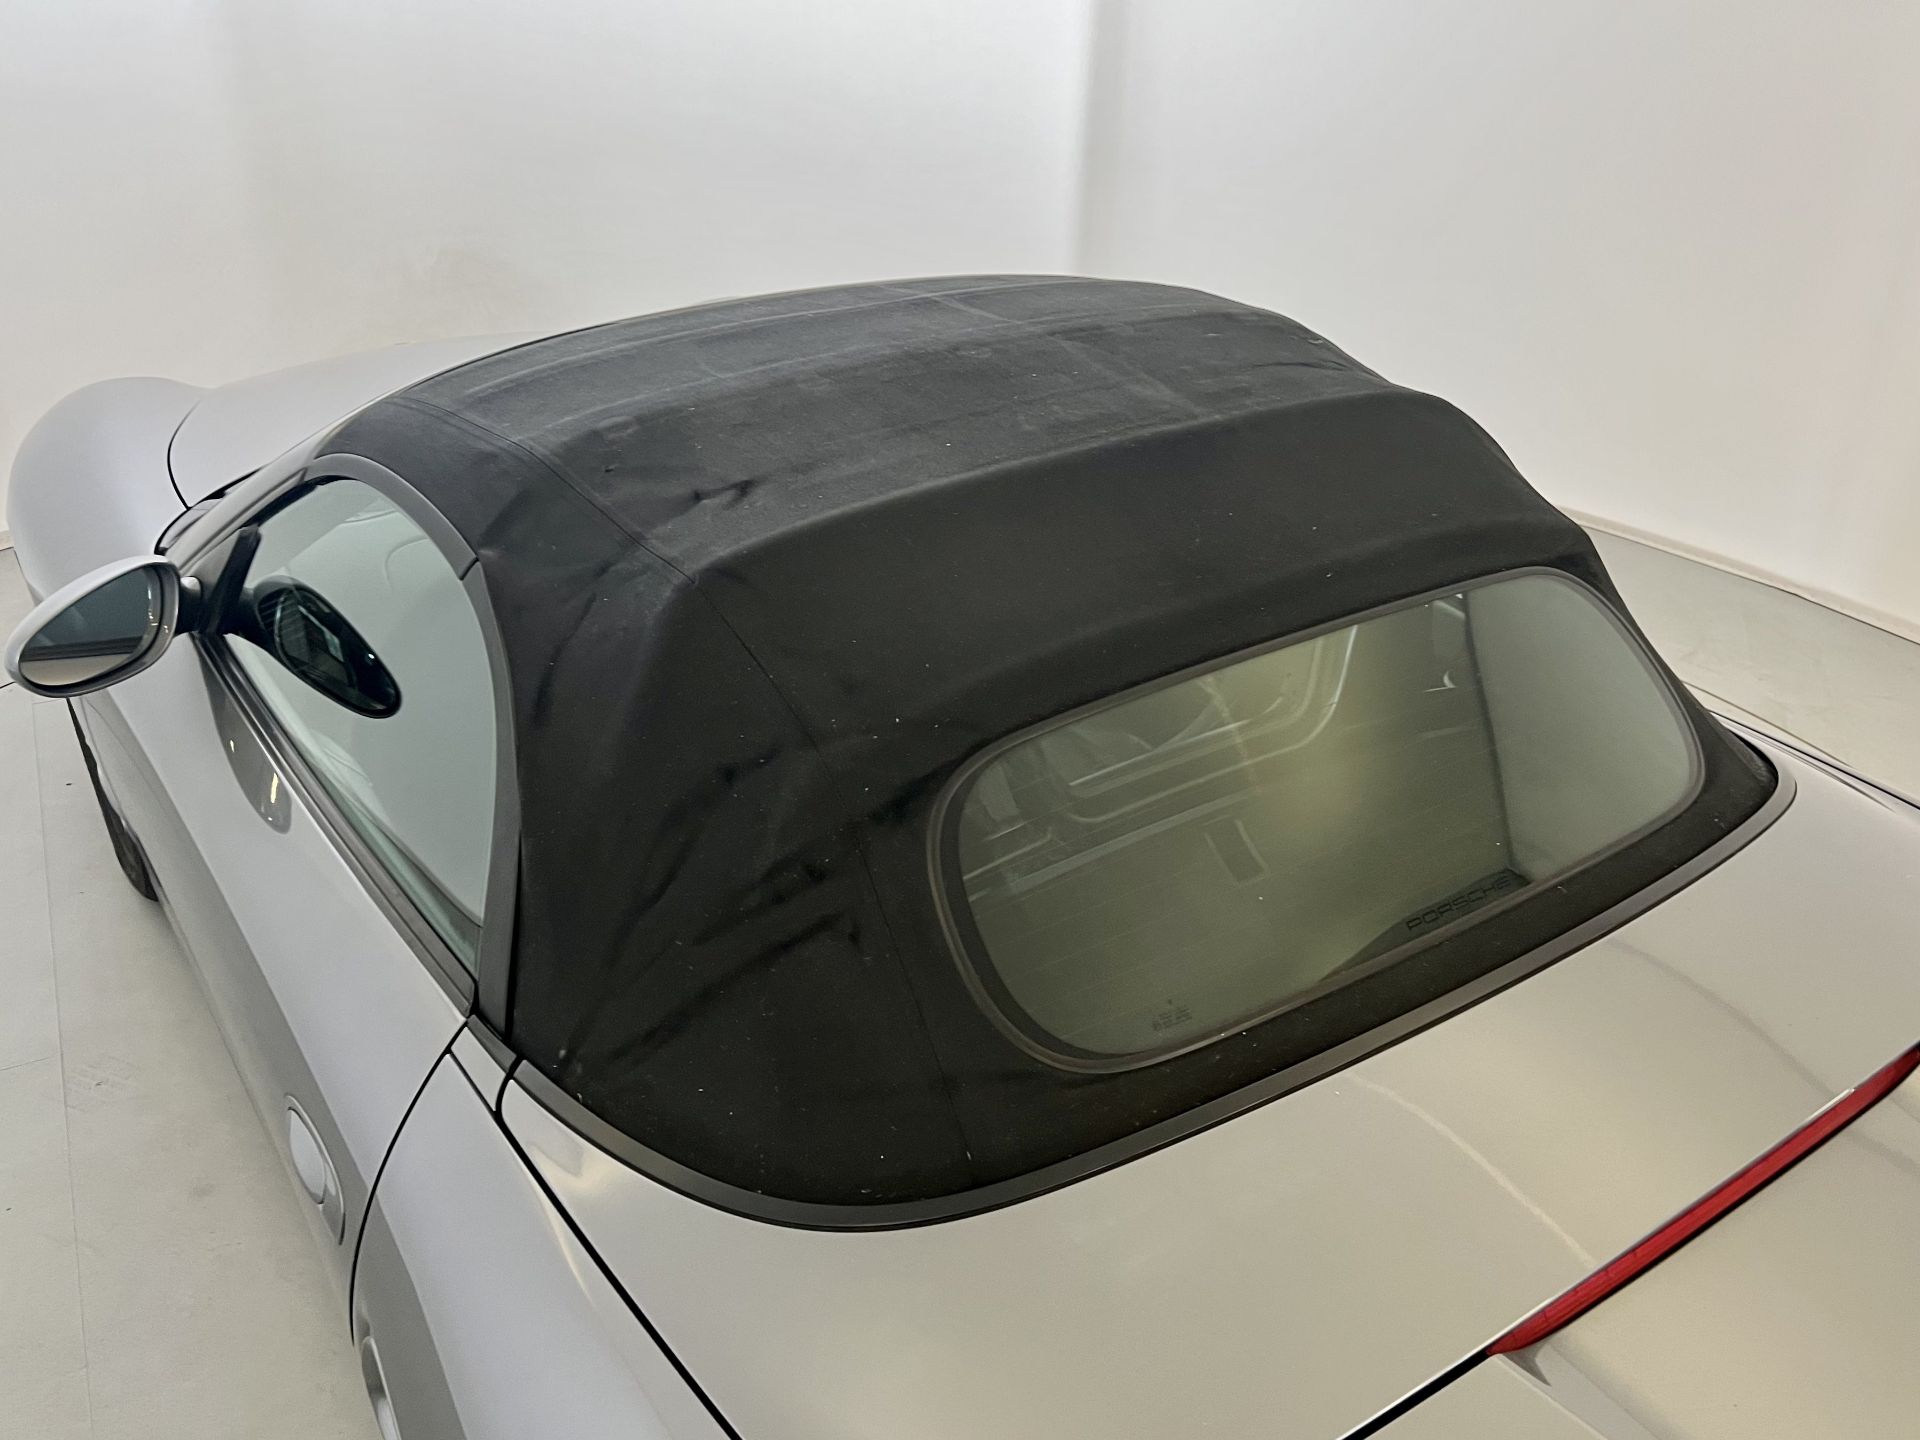 Porshe Boxster - Image 31 of 31